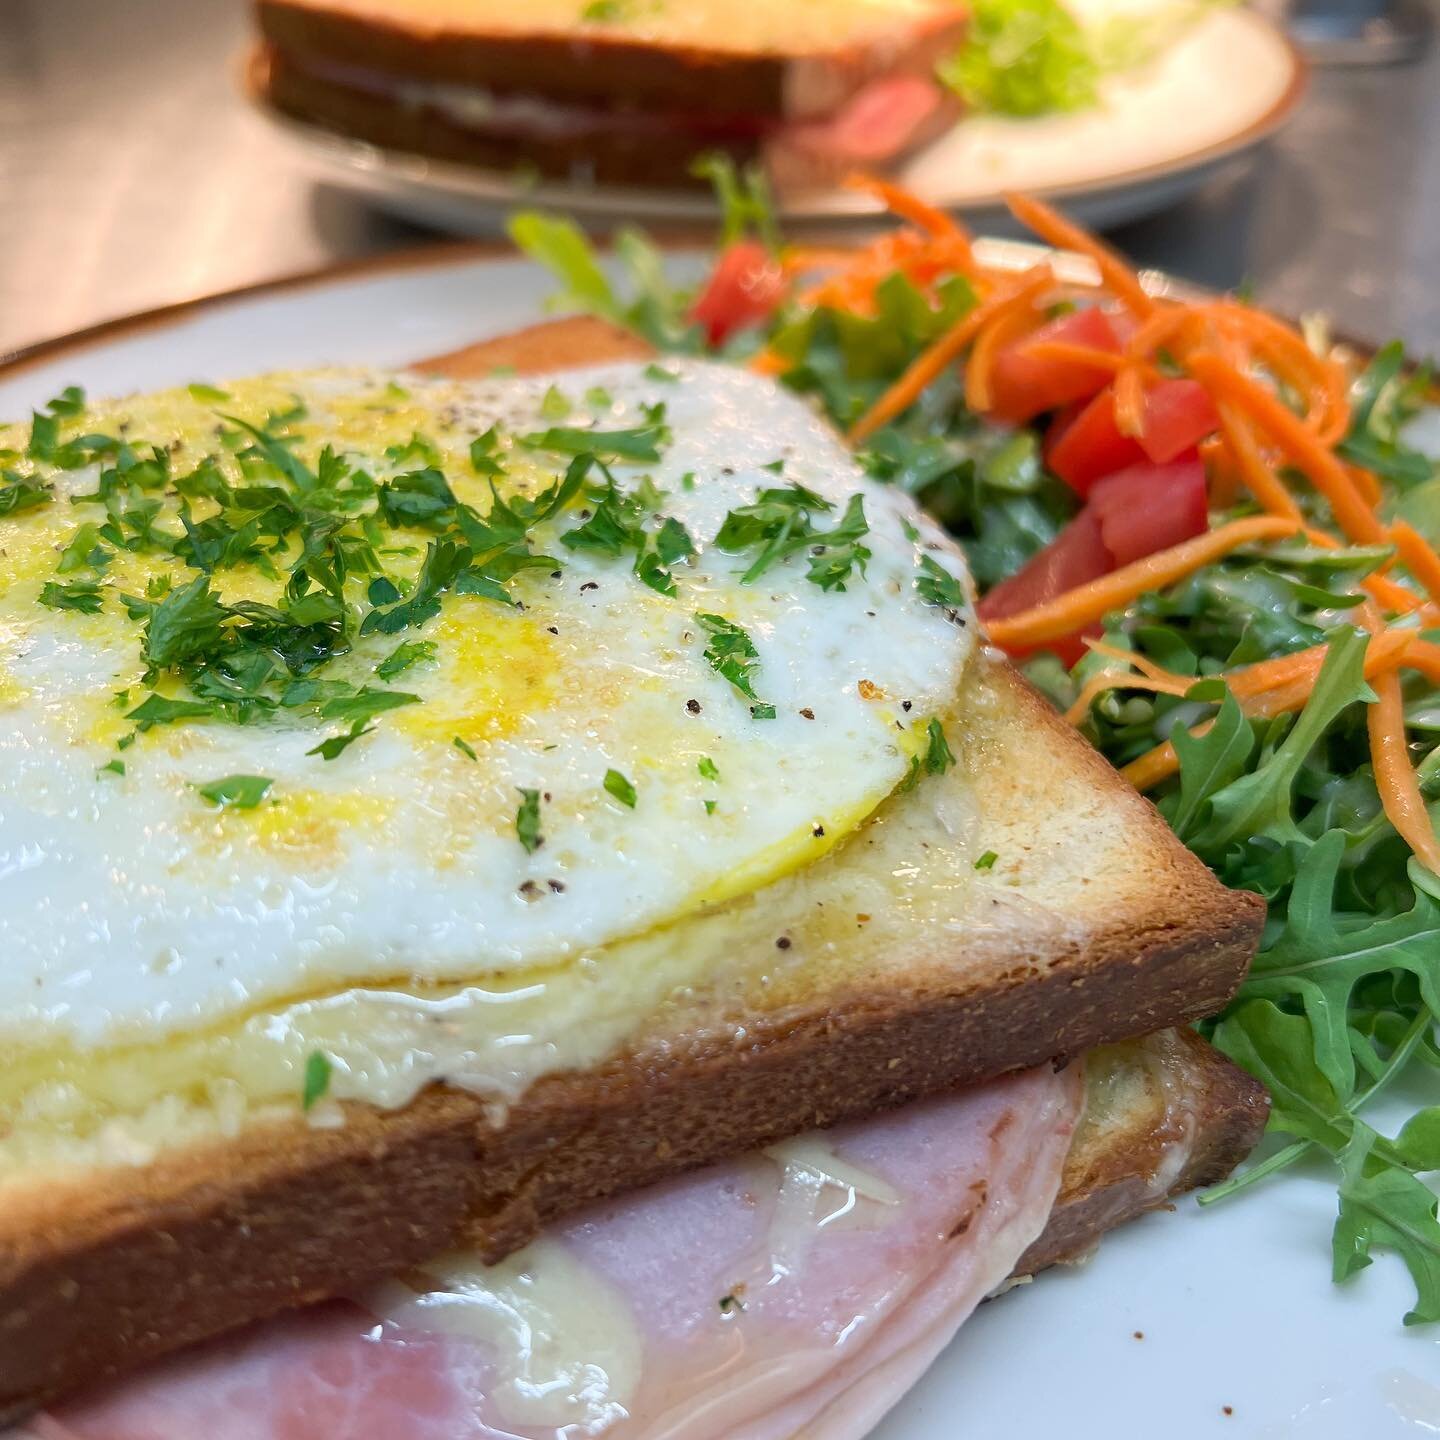 Two weeks in, and already a classic
Introducing our Croque Madame 🤤🧀
Bon App&eacute;tit 🇫🇷

#brunchtime #hermosabeach #hermosaoneeats #trulyhermosa #croquemadame #croquemonsieur #frenchfood #southbayeats